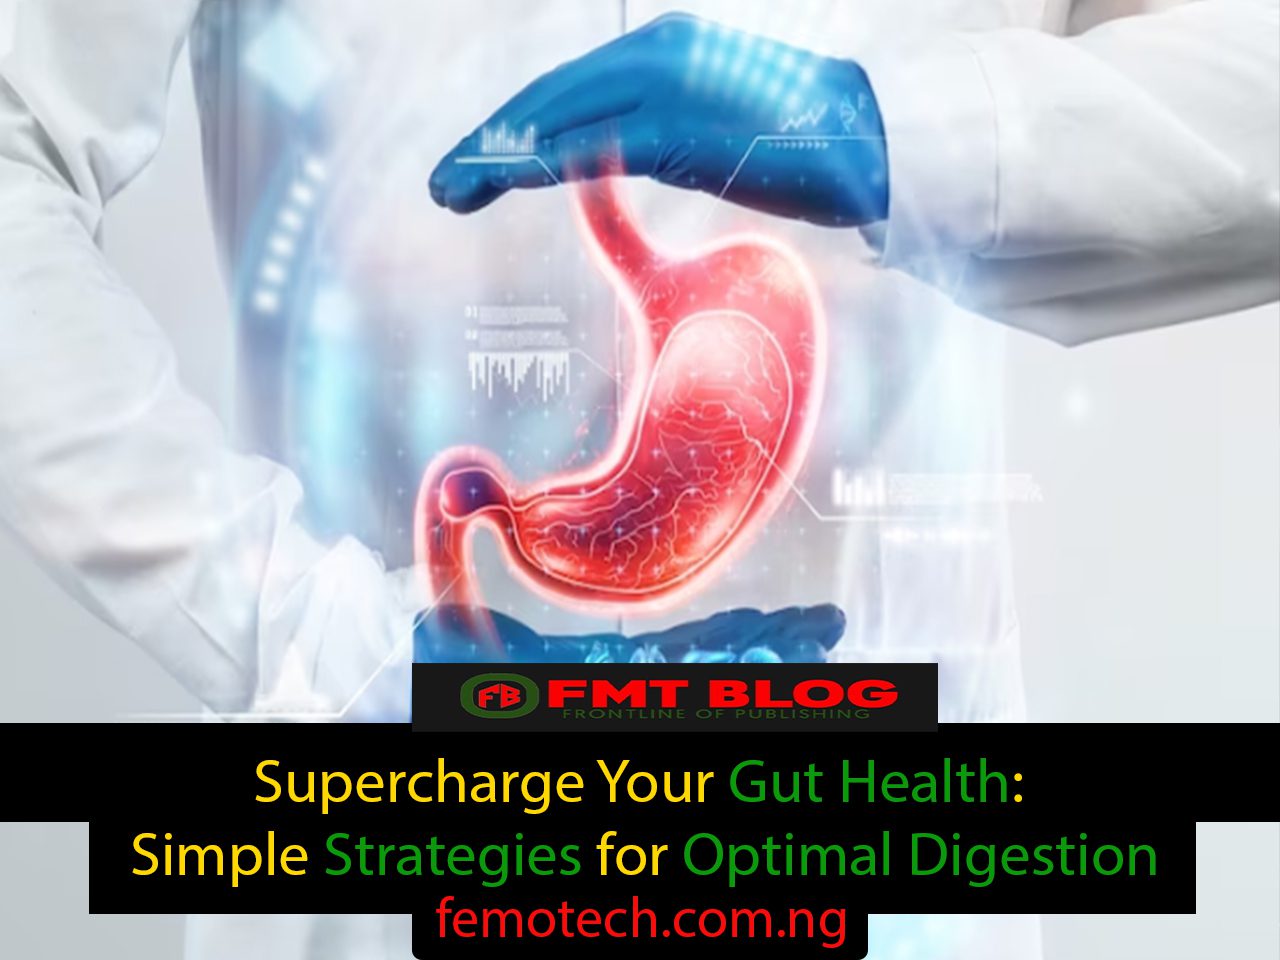 Supercharge Your Gut Health: 4 Simple Strategies for Optimal Digestion